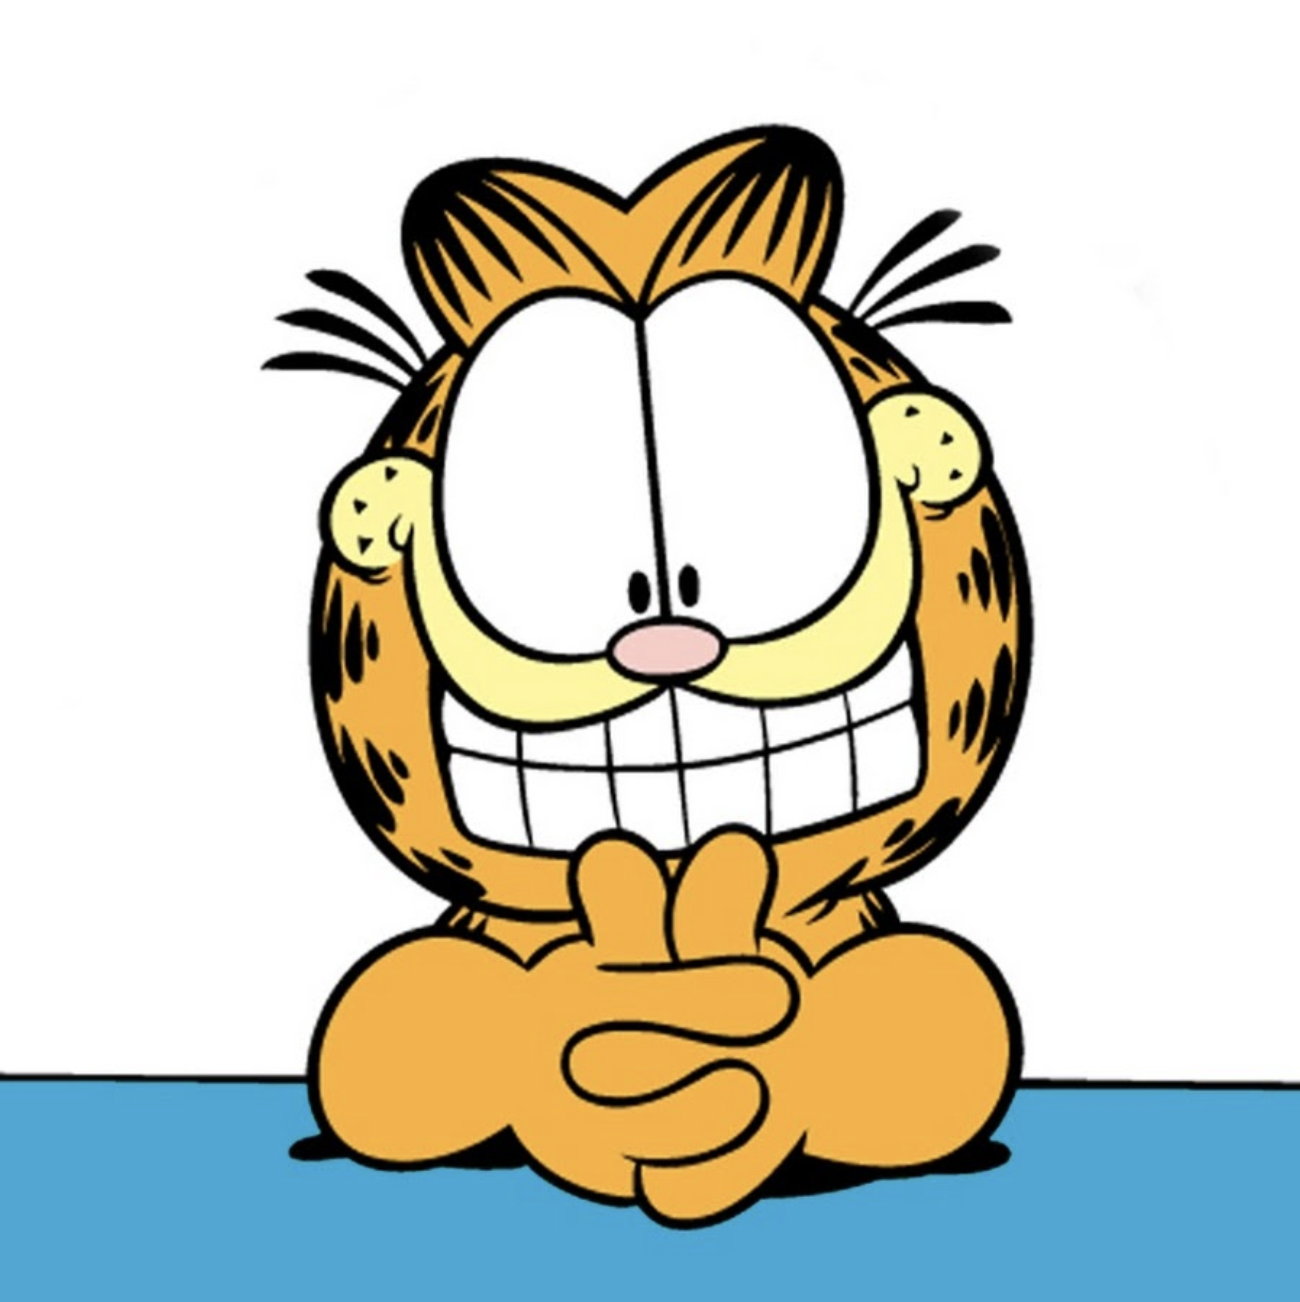 Today in history Garfield, the cat cartoon character